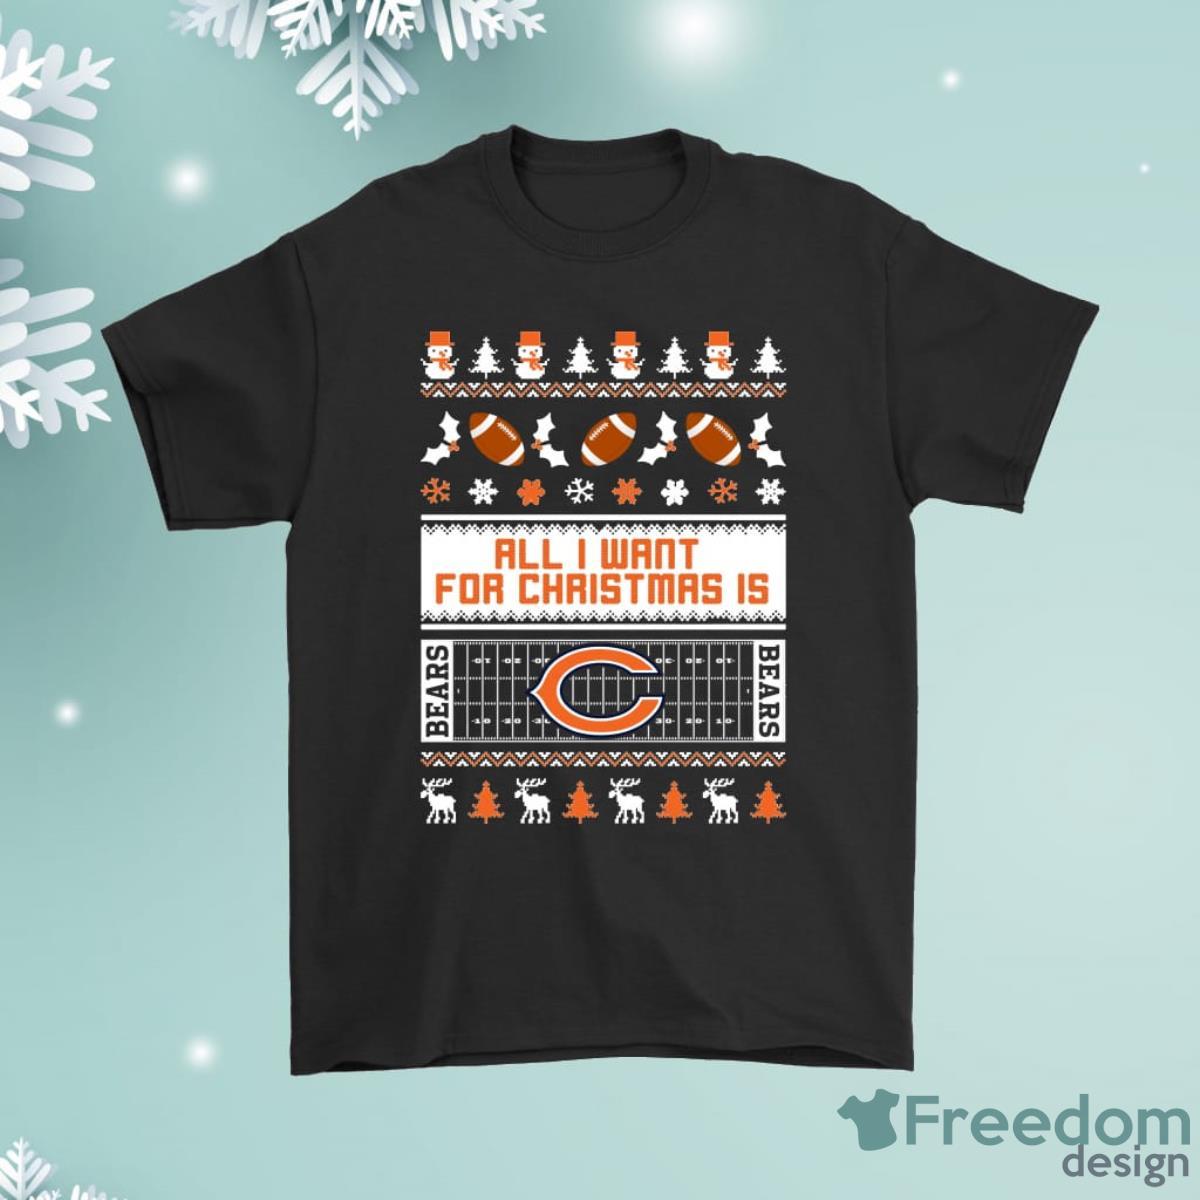 All I Want For Christmas Is Chicago Bears Shirt Product Photo 1